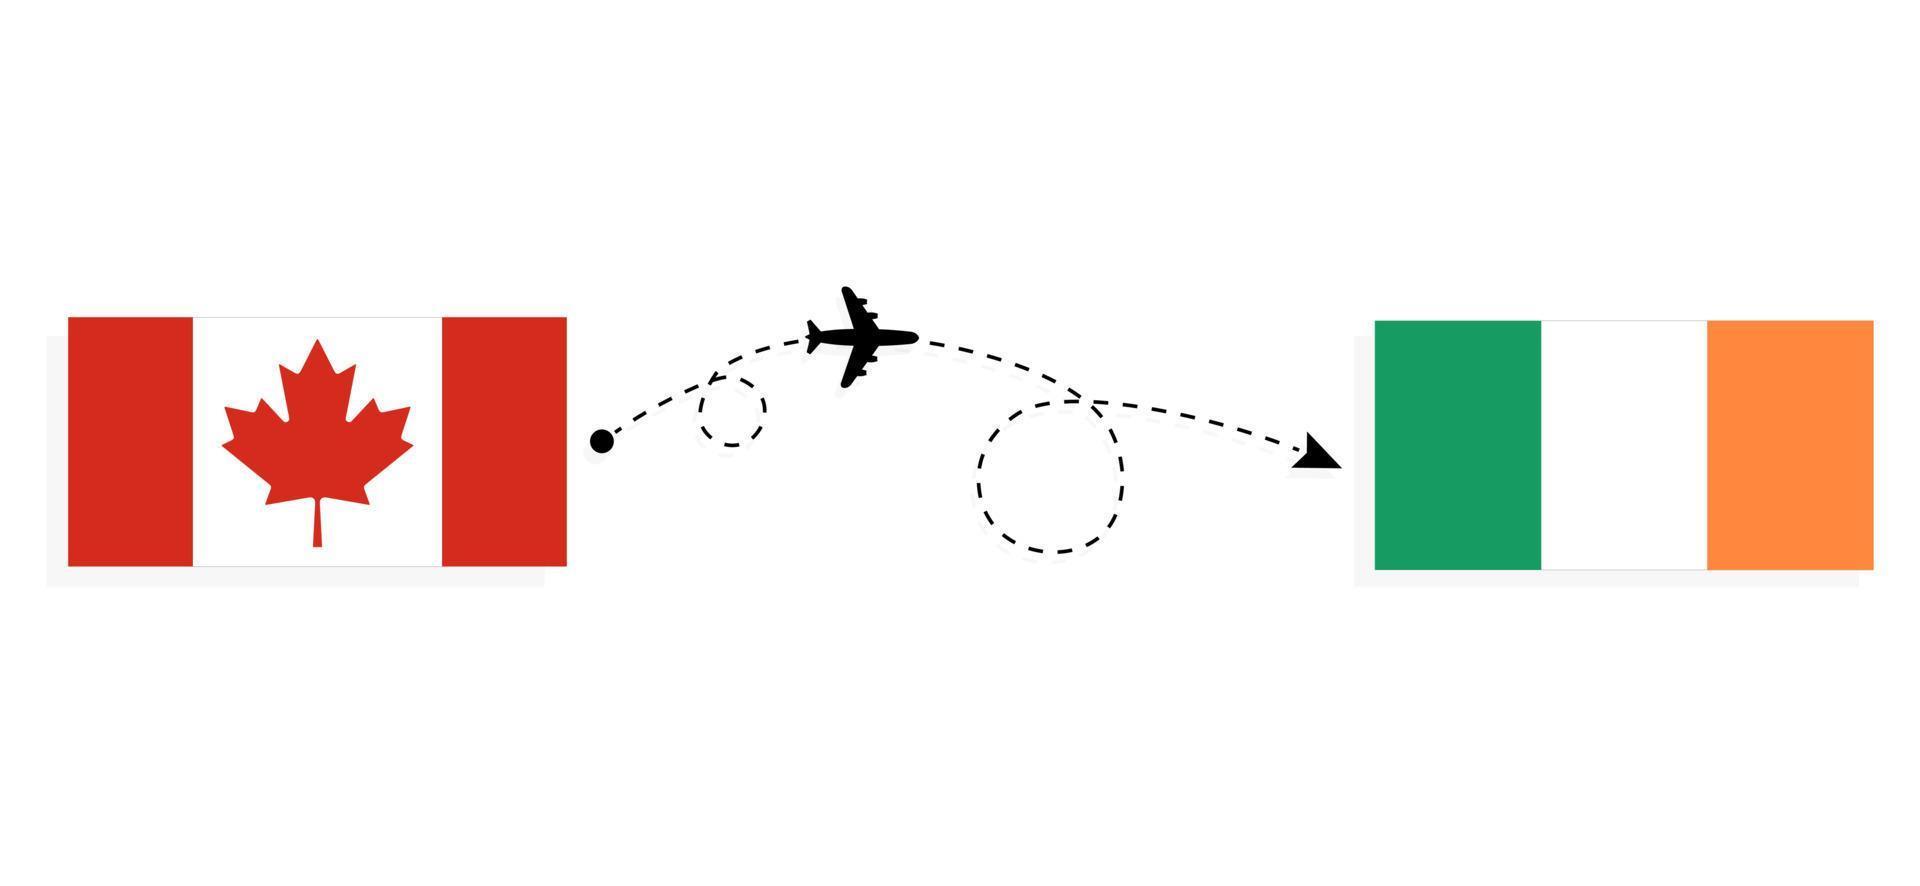 Flight and travel from Canada to Ireland by passenger airplane Travel concept vector